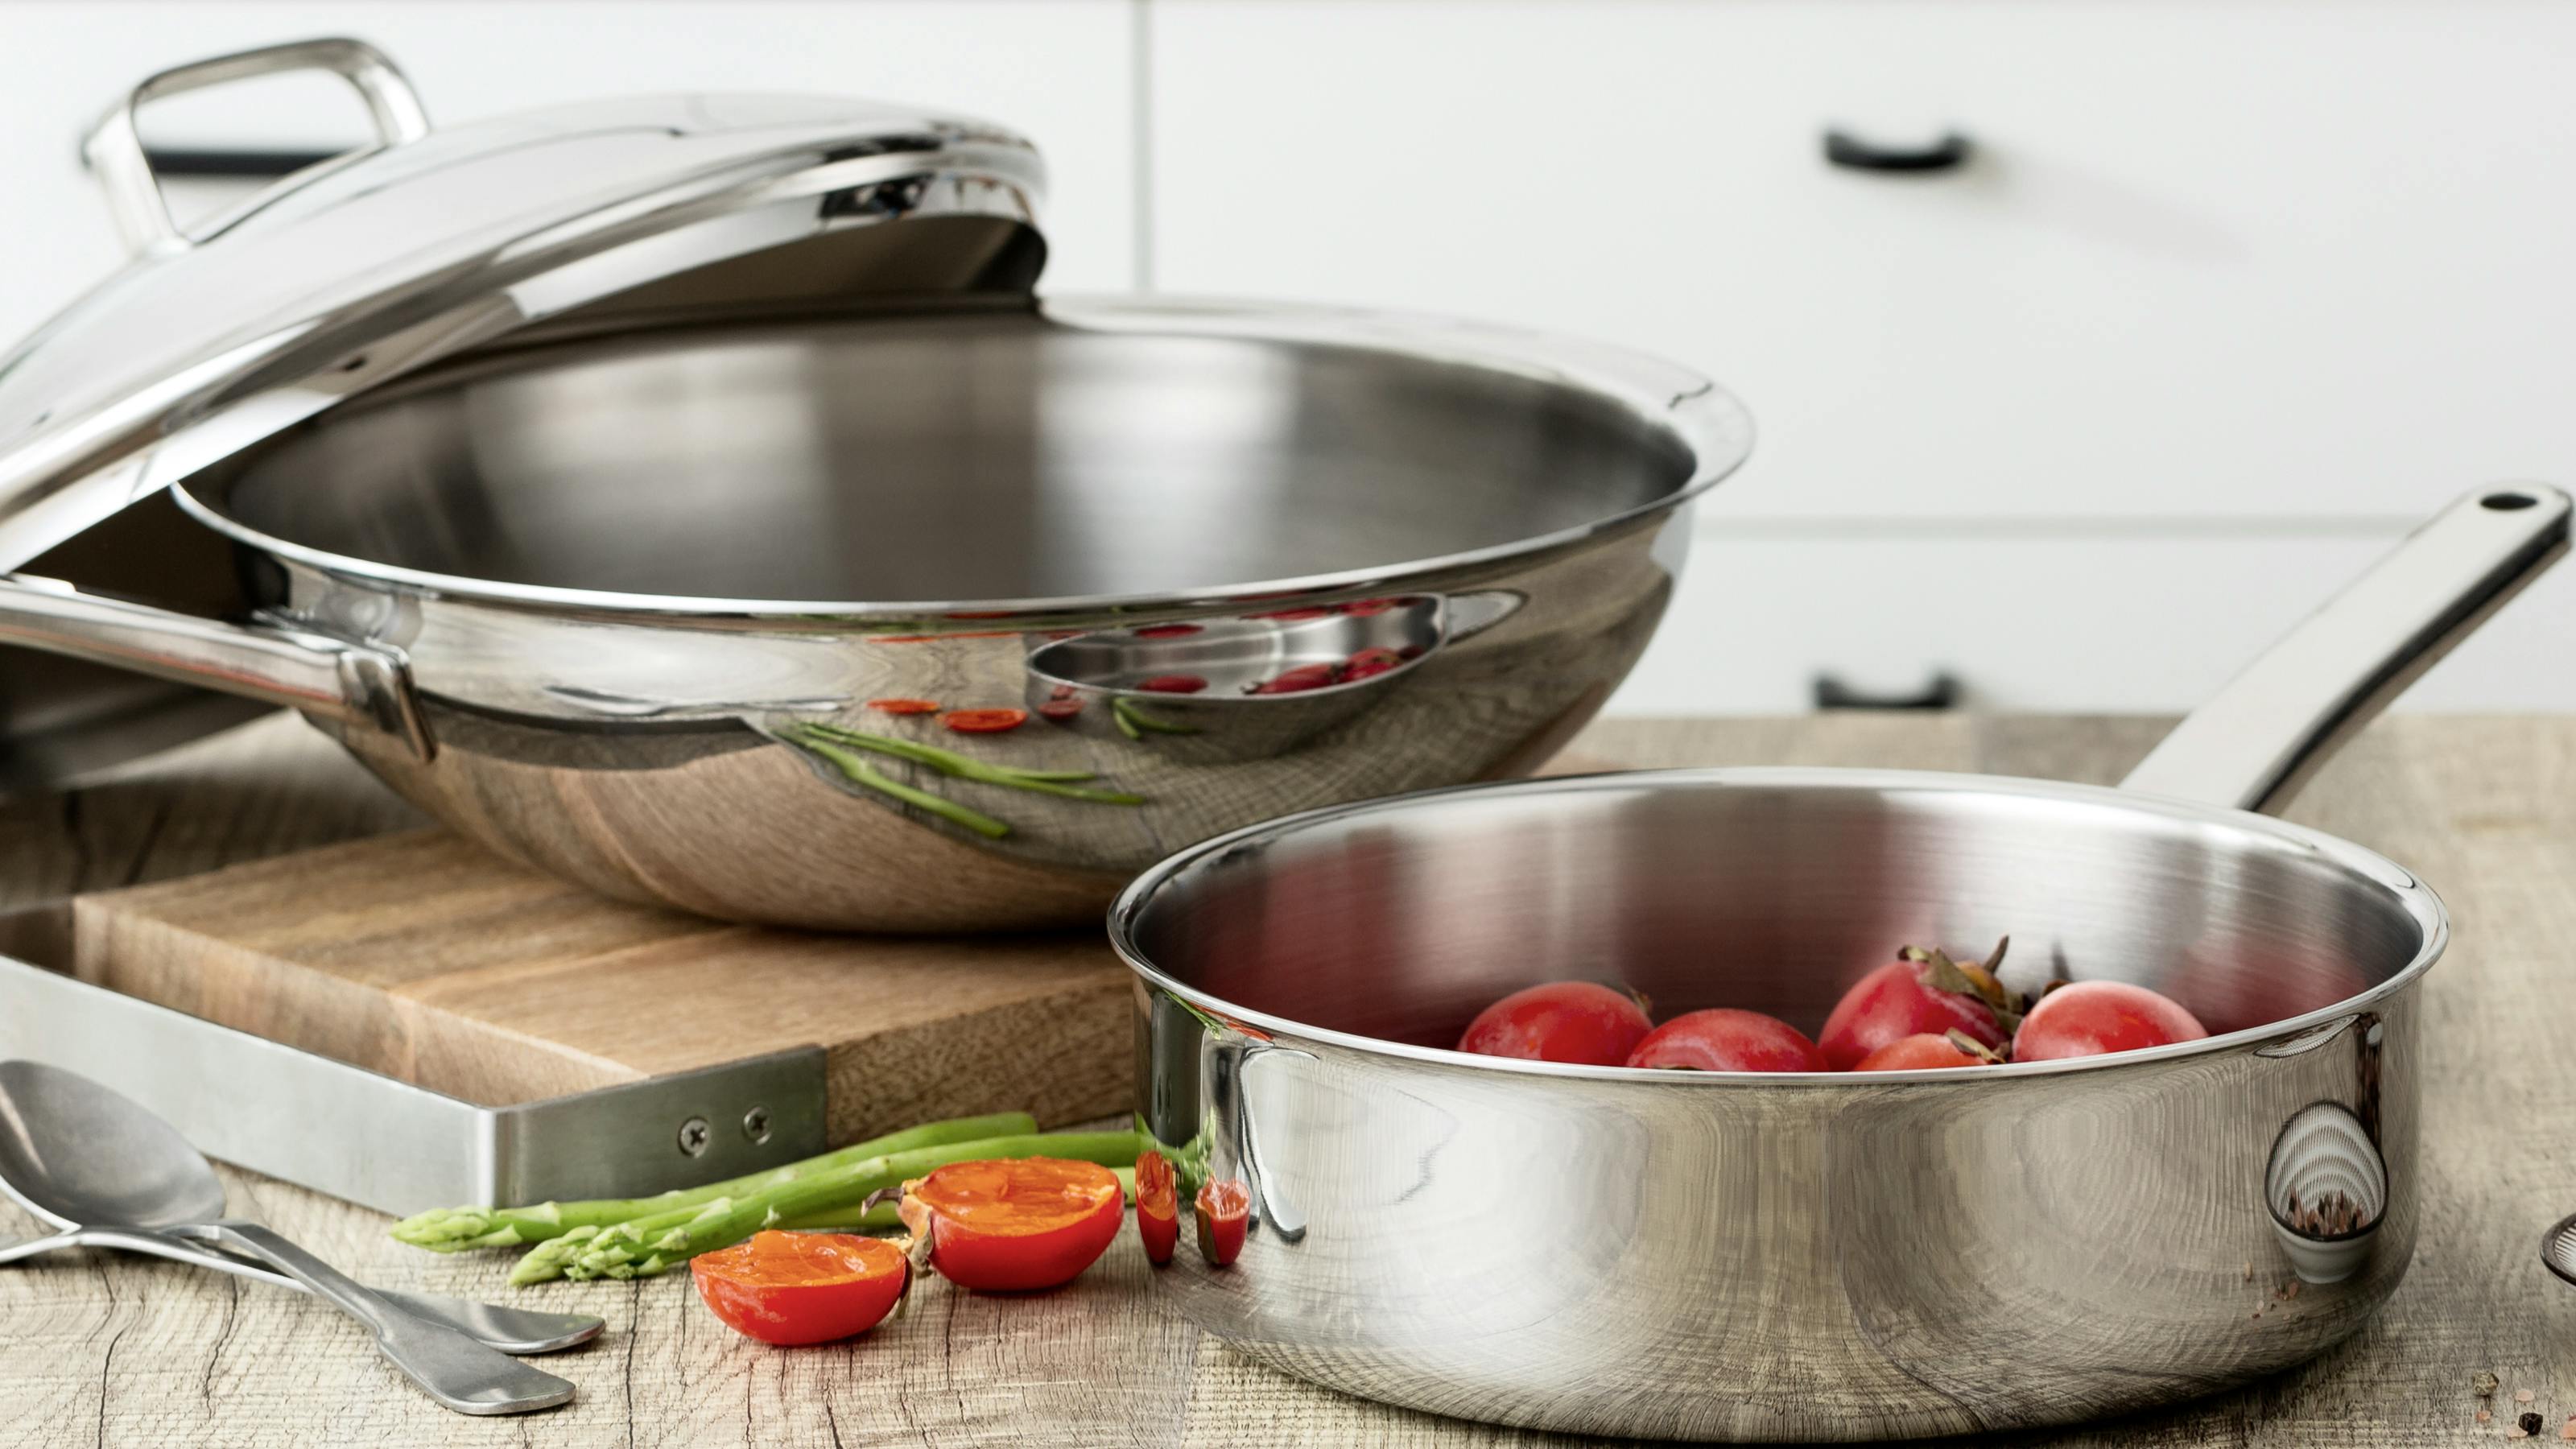 Two stainless steel pans on a countertop with food in them. There are some vegetables next to the pans. 